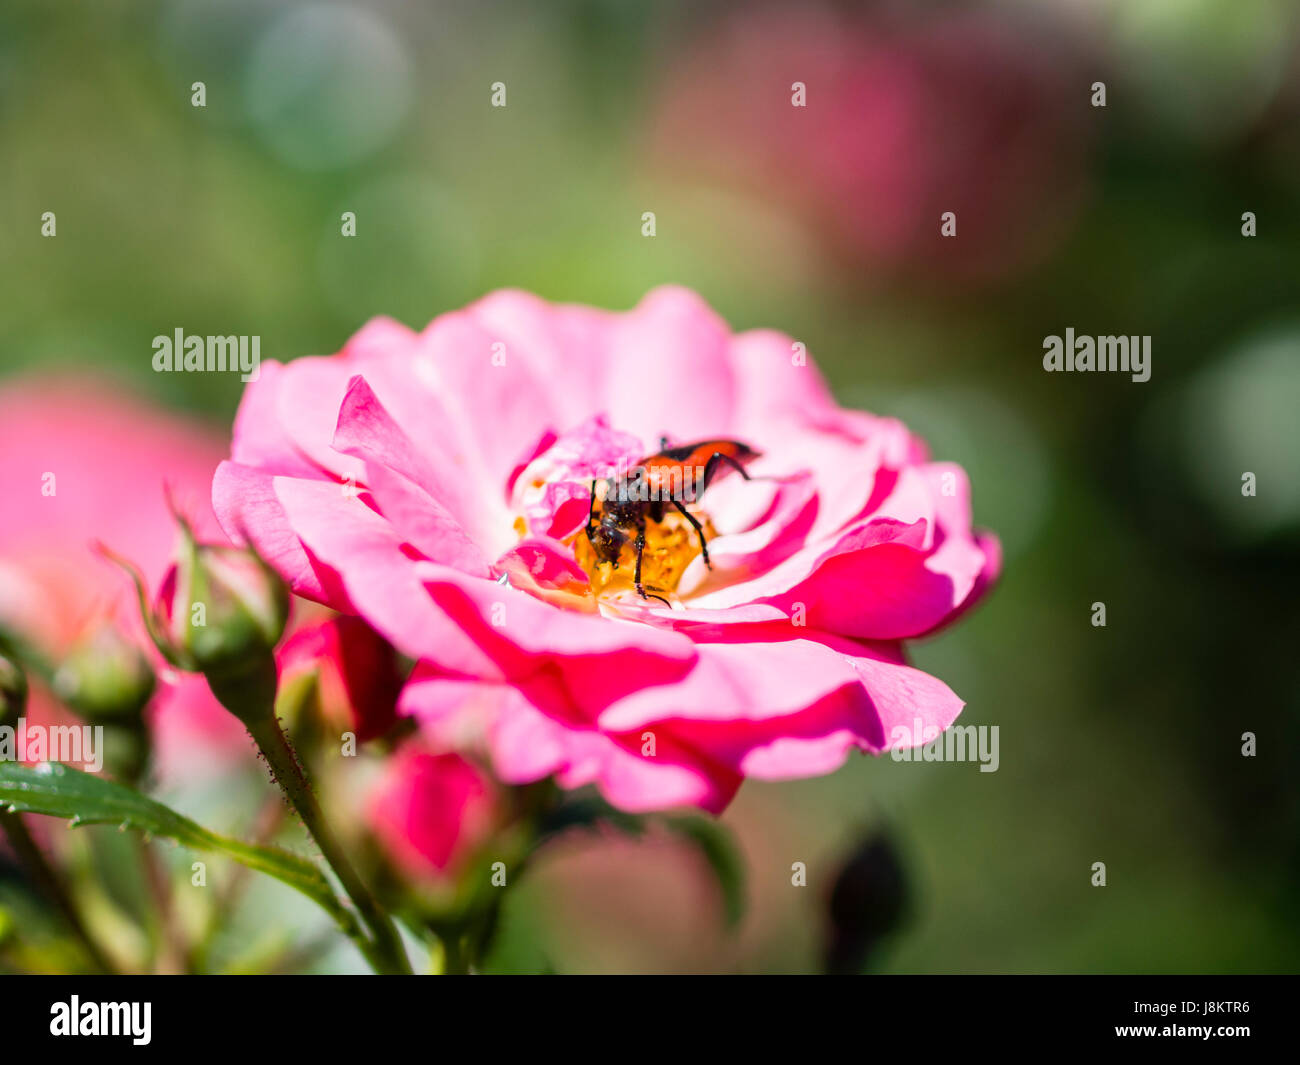 Longhorn beetle on pink fucsia flower Stock Photo